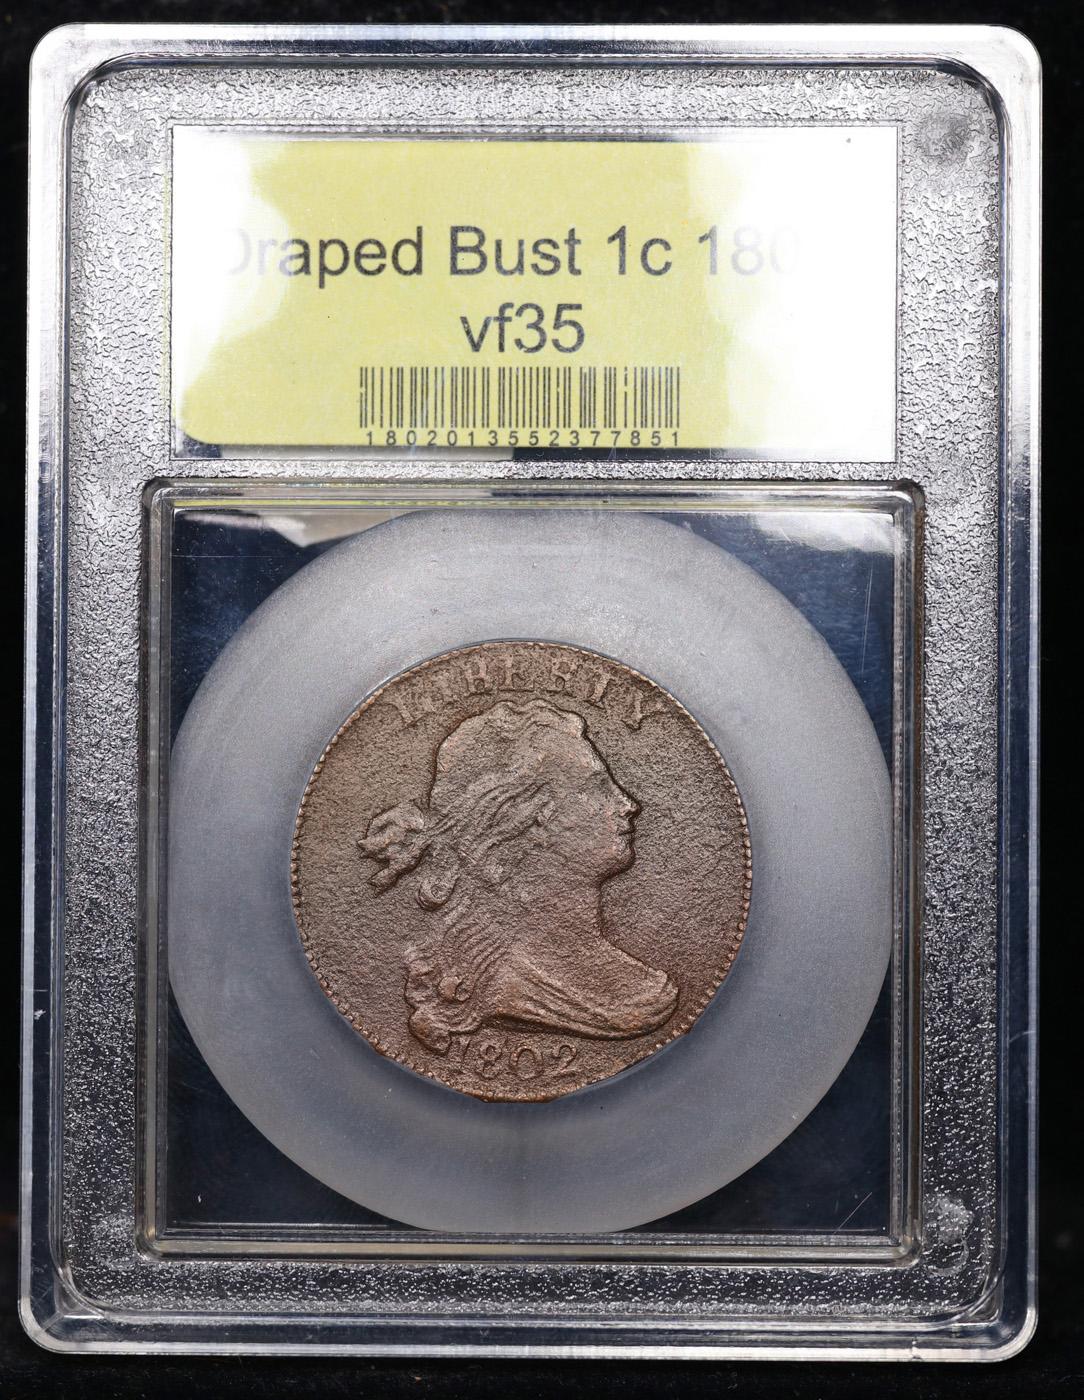 ***Auction Highlight*** 1802 Draped Bust Large Cent 1c Graded vf++ By USCG (fc)